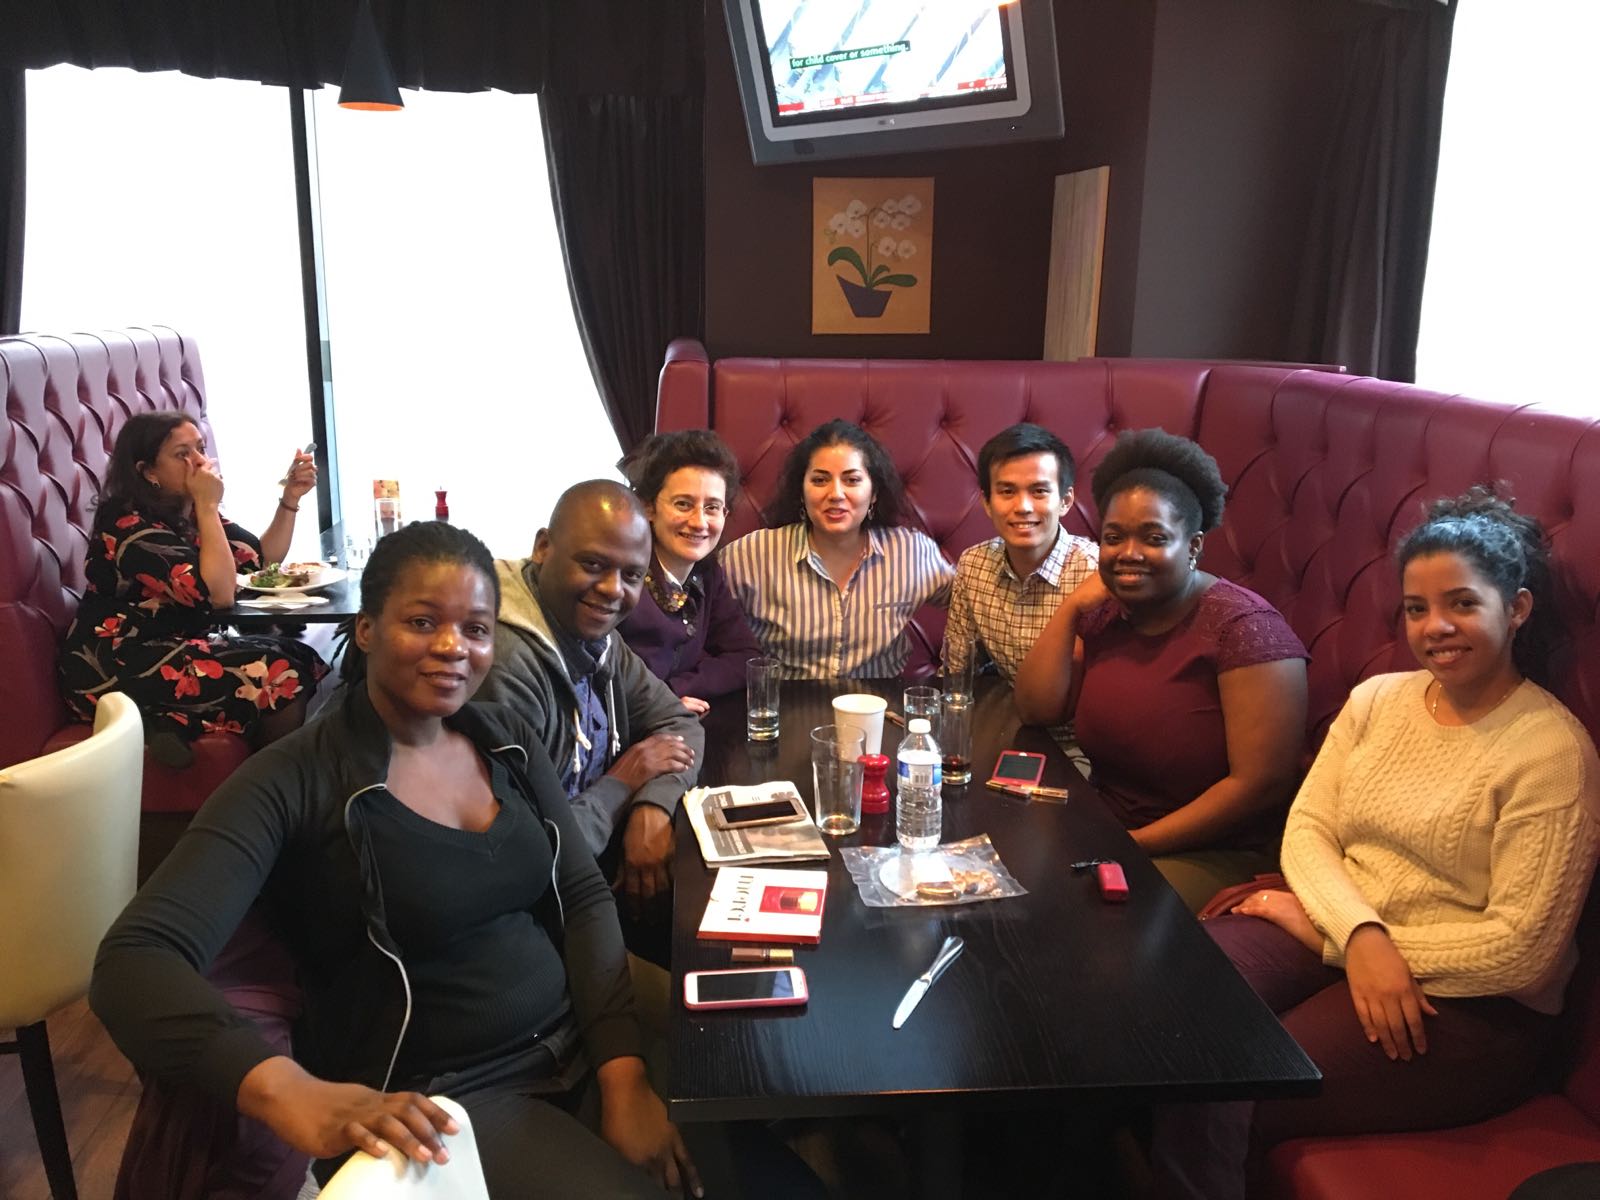 BBC Chevening Scholars eat lunch together at the end of their placements